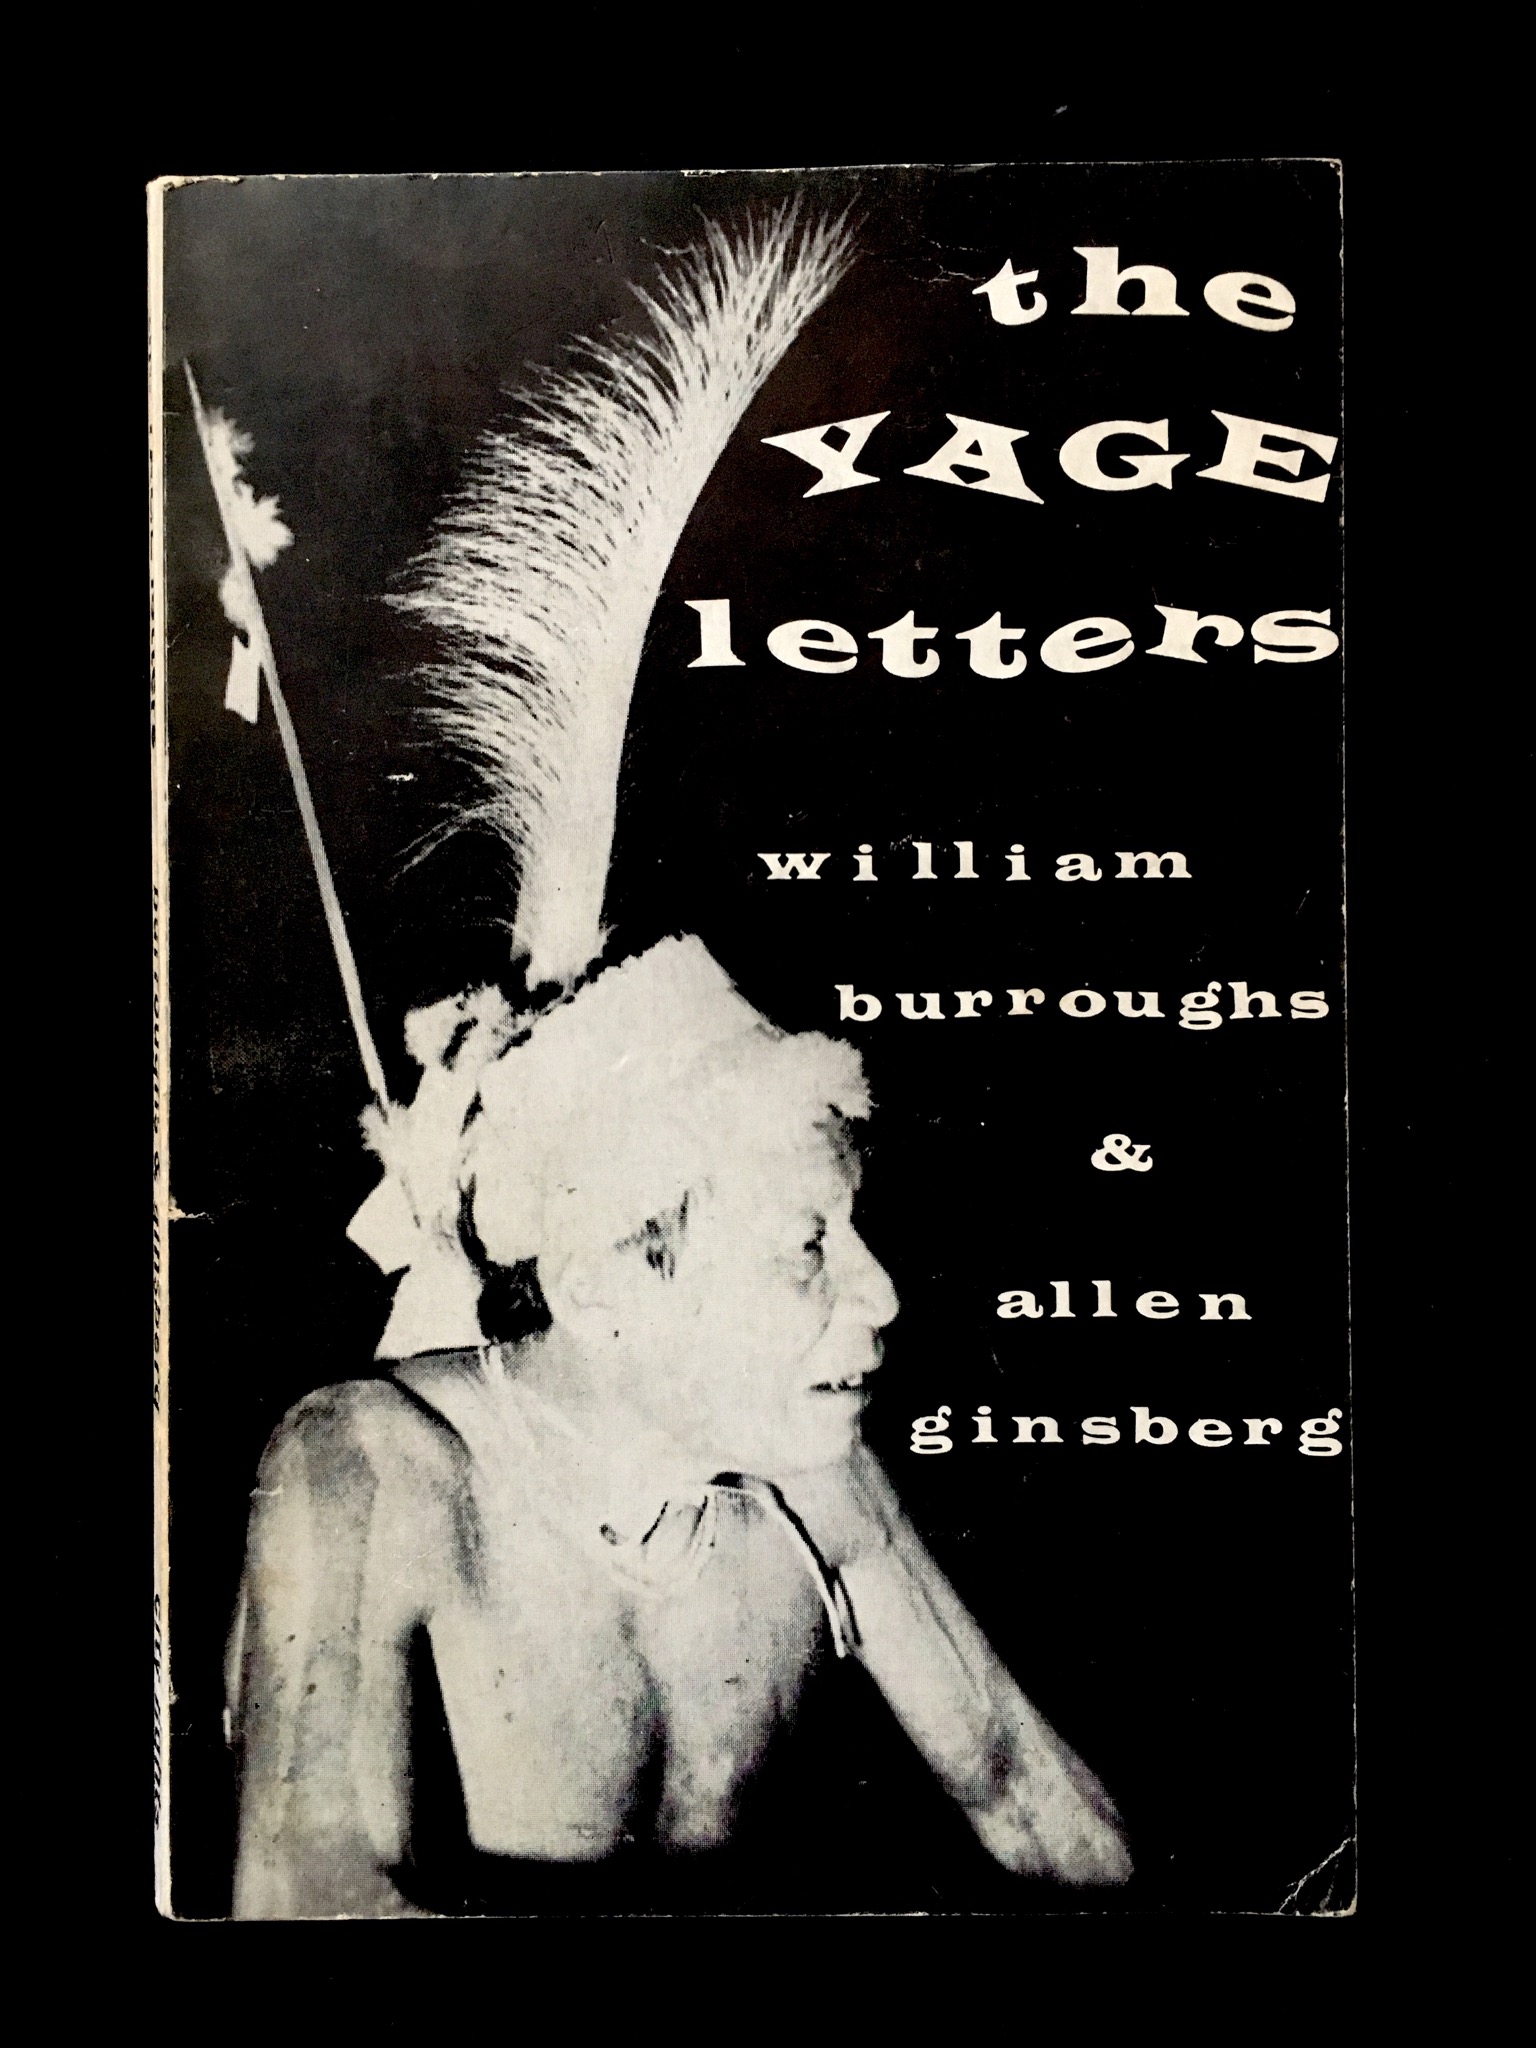 The Yage Letters by William Burroughs & Allen Ginsberg